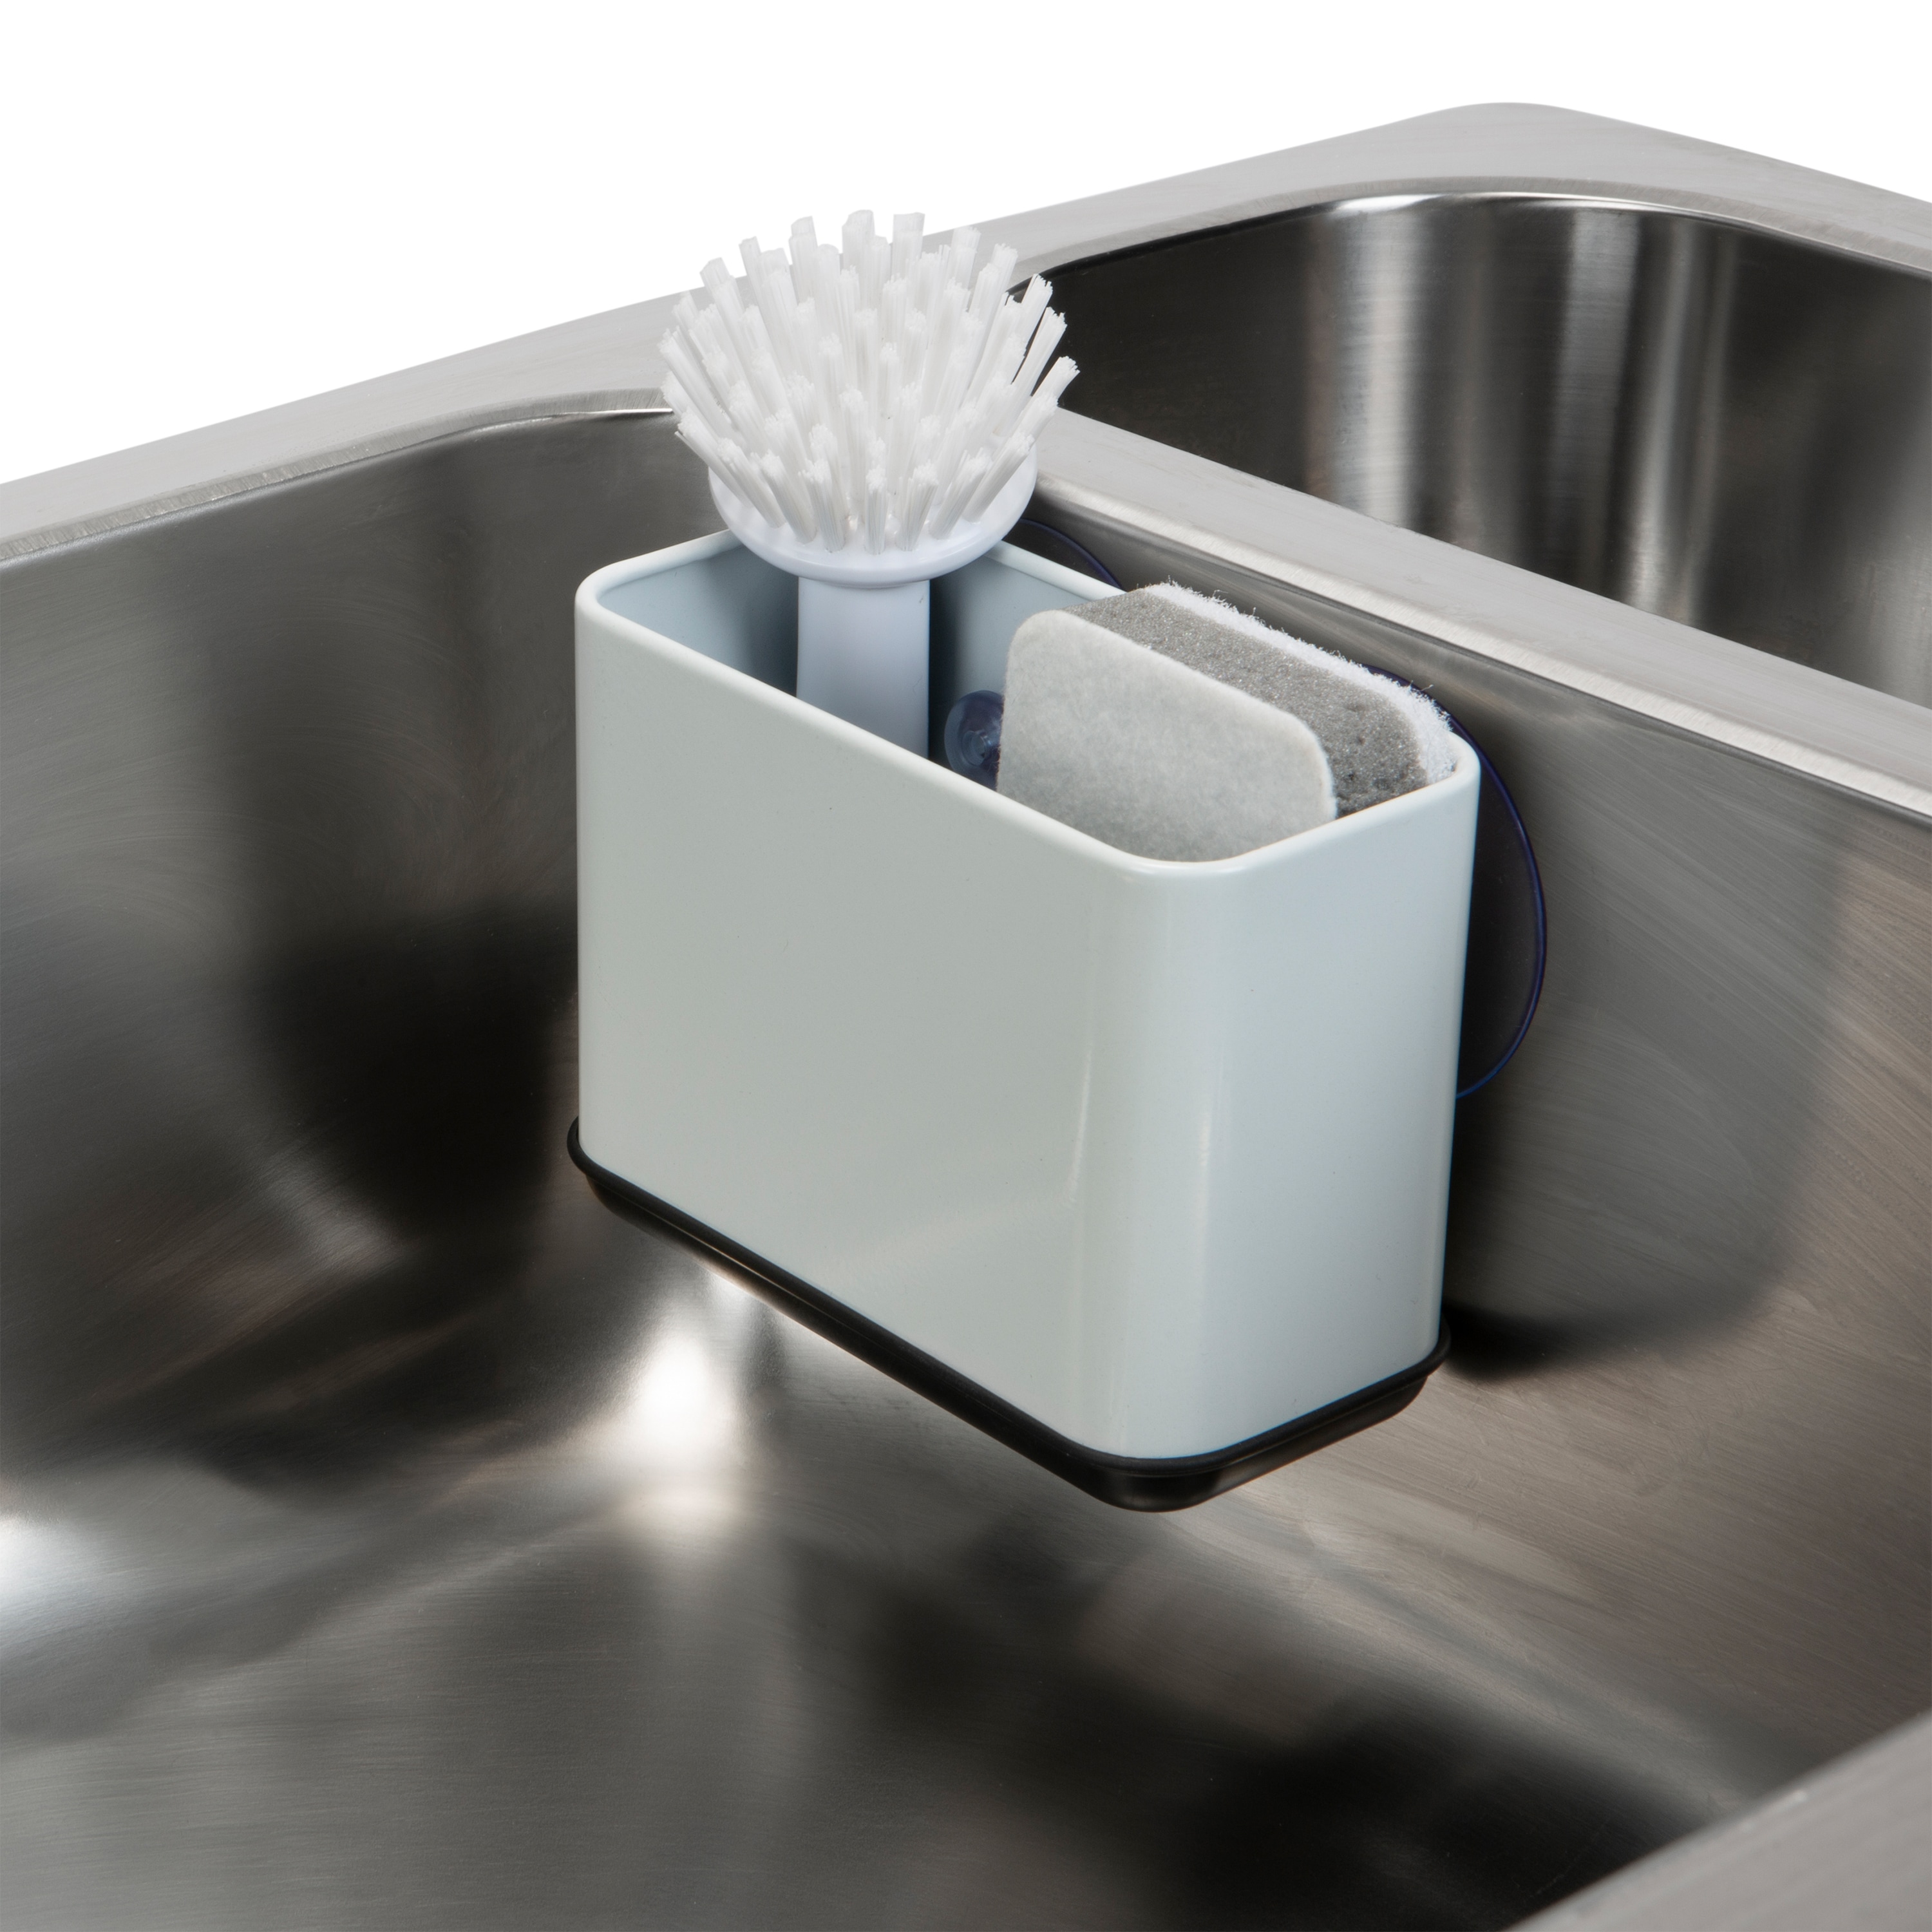 OXO Good Grips Stronghold Suction Sinkware Organizer - Gray, One Size &  Good Grips Dish Brush